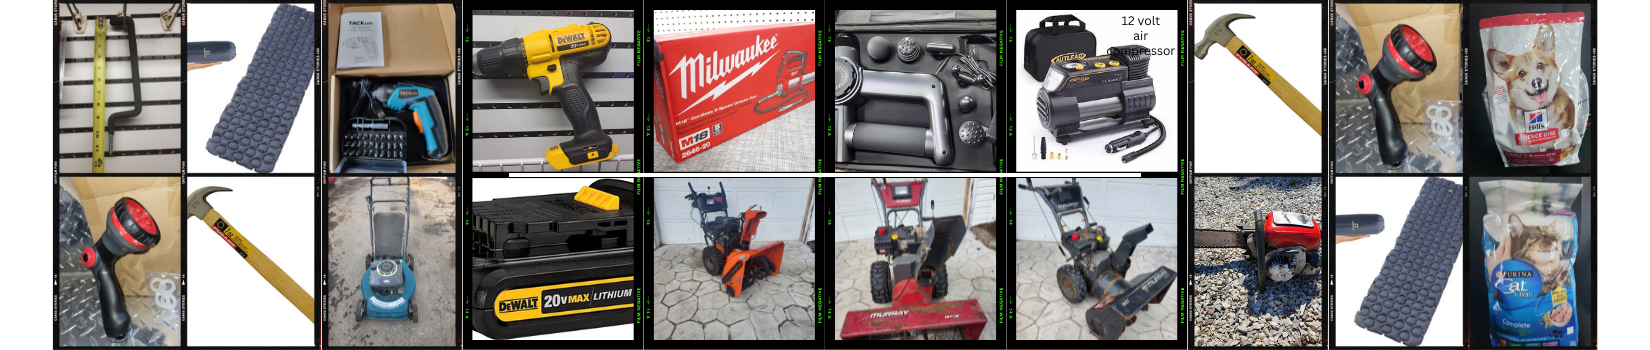 Zehr's Sales May 4th Lawn Mowers, Equipment Tools and More Online Auction